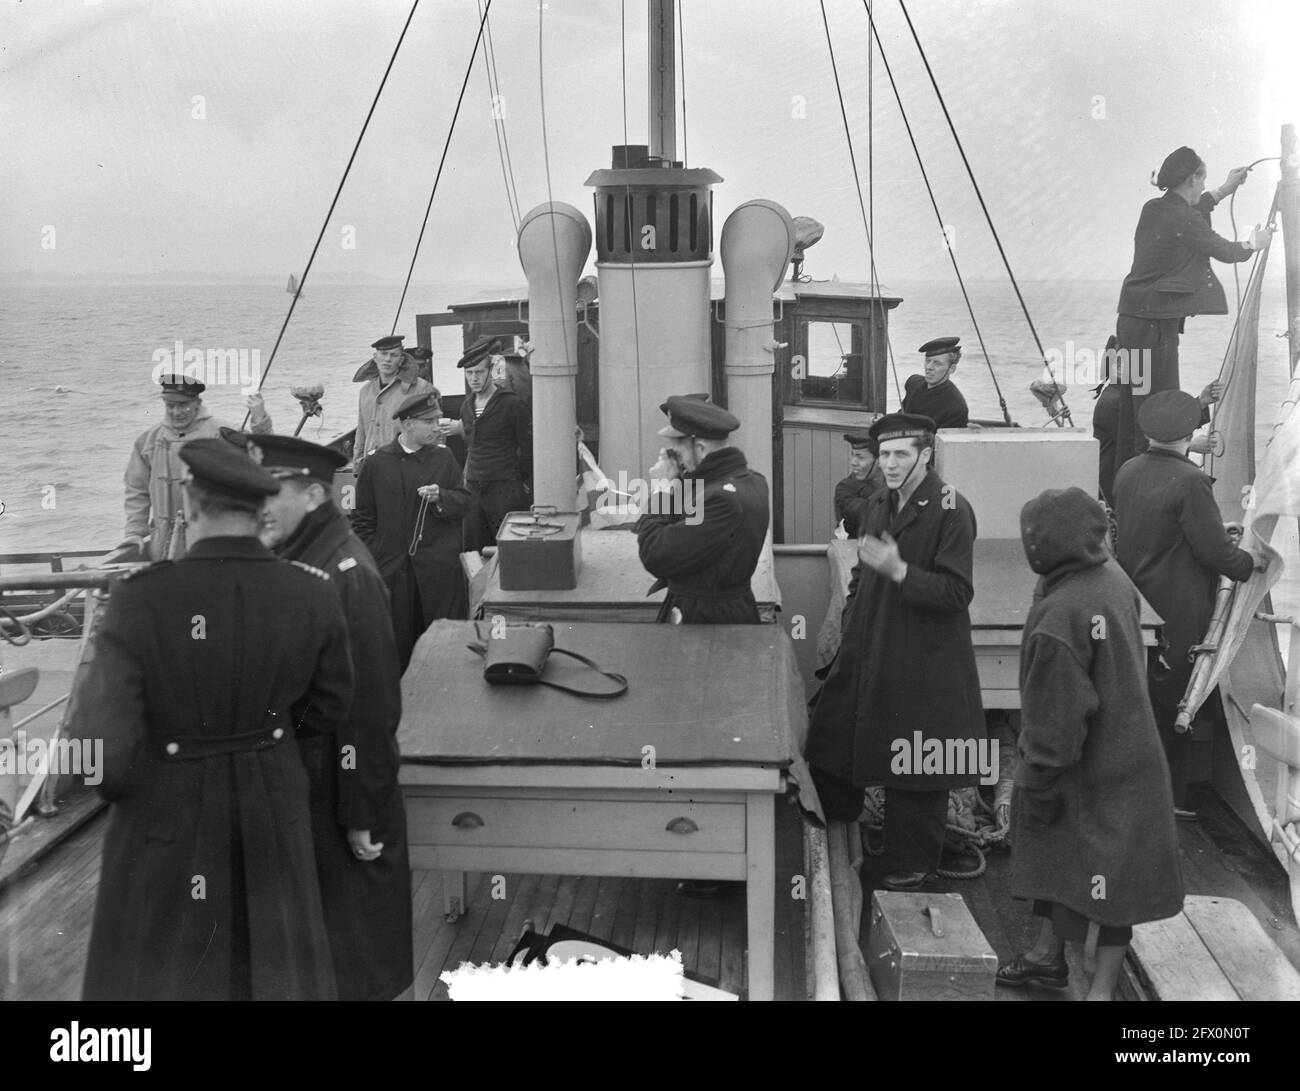 Sailing contest of the Royal Navy Colonel Bax, October 24, 1952, MARINE, sailing contests, The Netherlands, 20th century press agency photo, news to remember, documentary, historic photography 1945-1990, visual stories, human history of the Twentieth Century, capturing moments in time Stock Photo